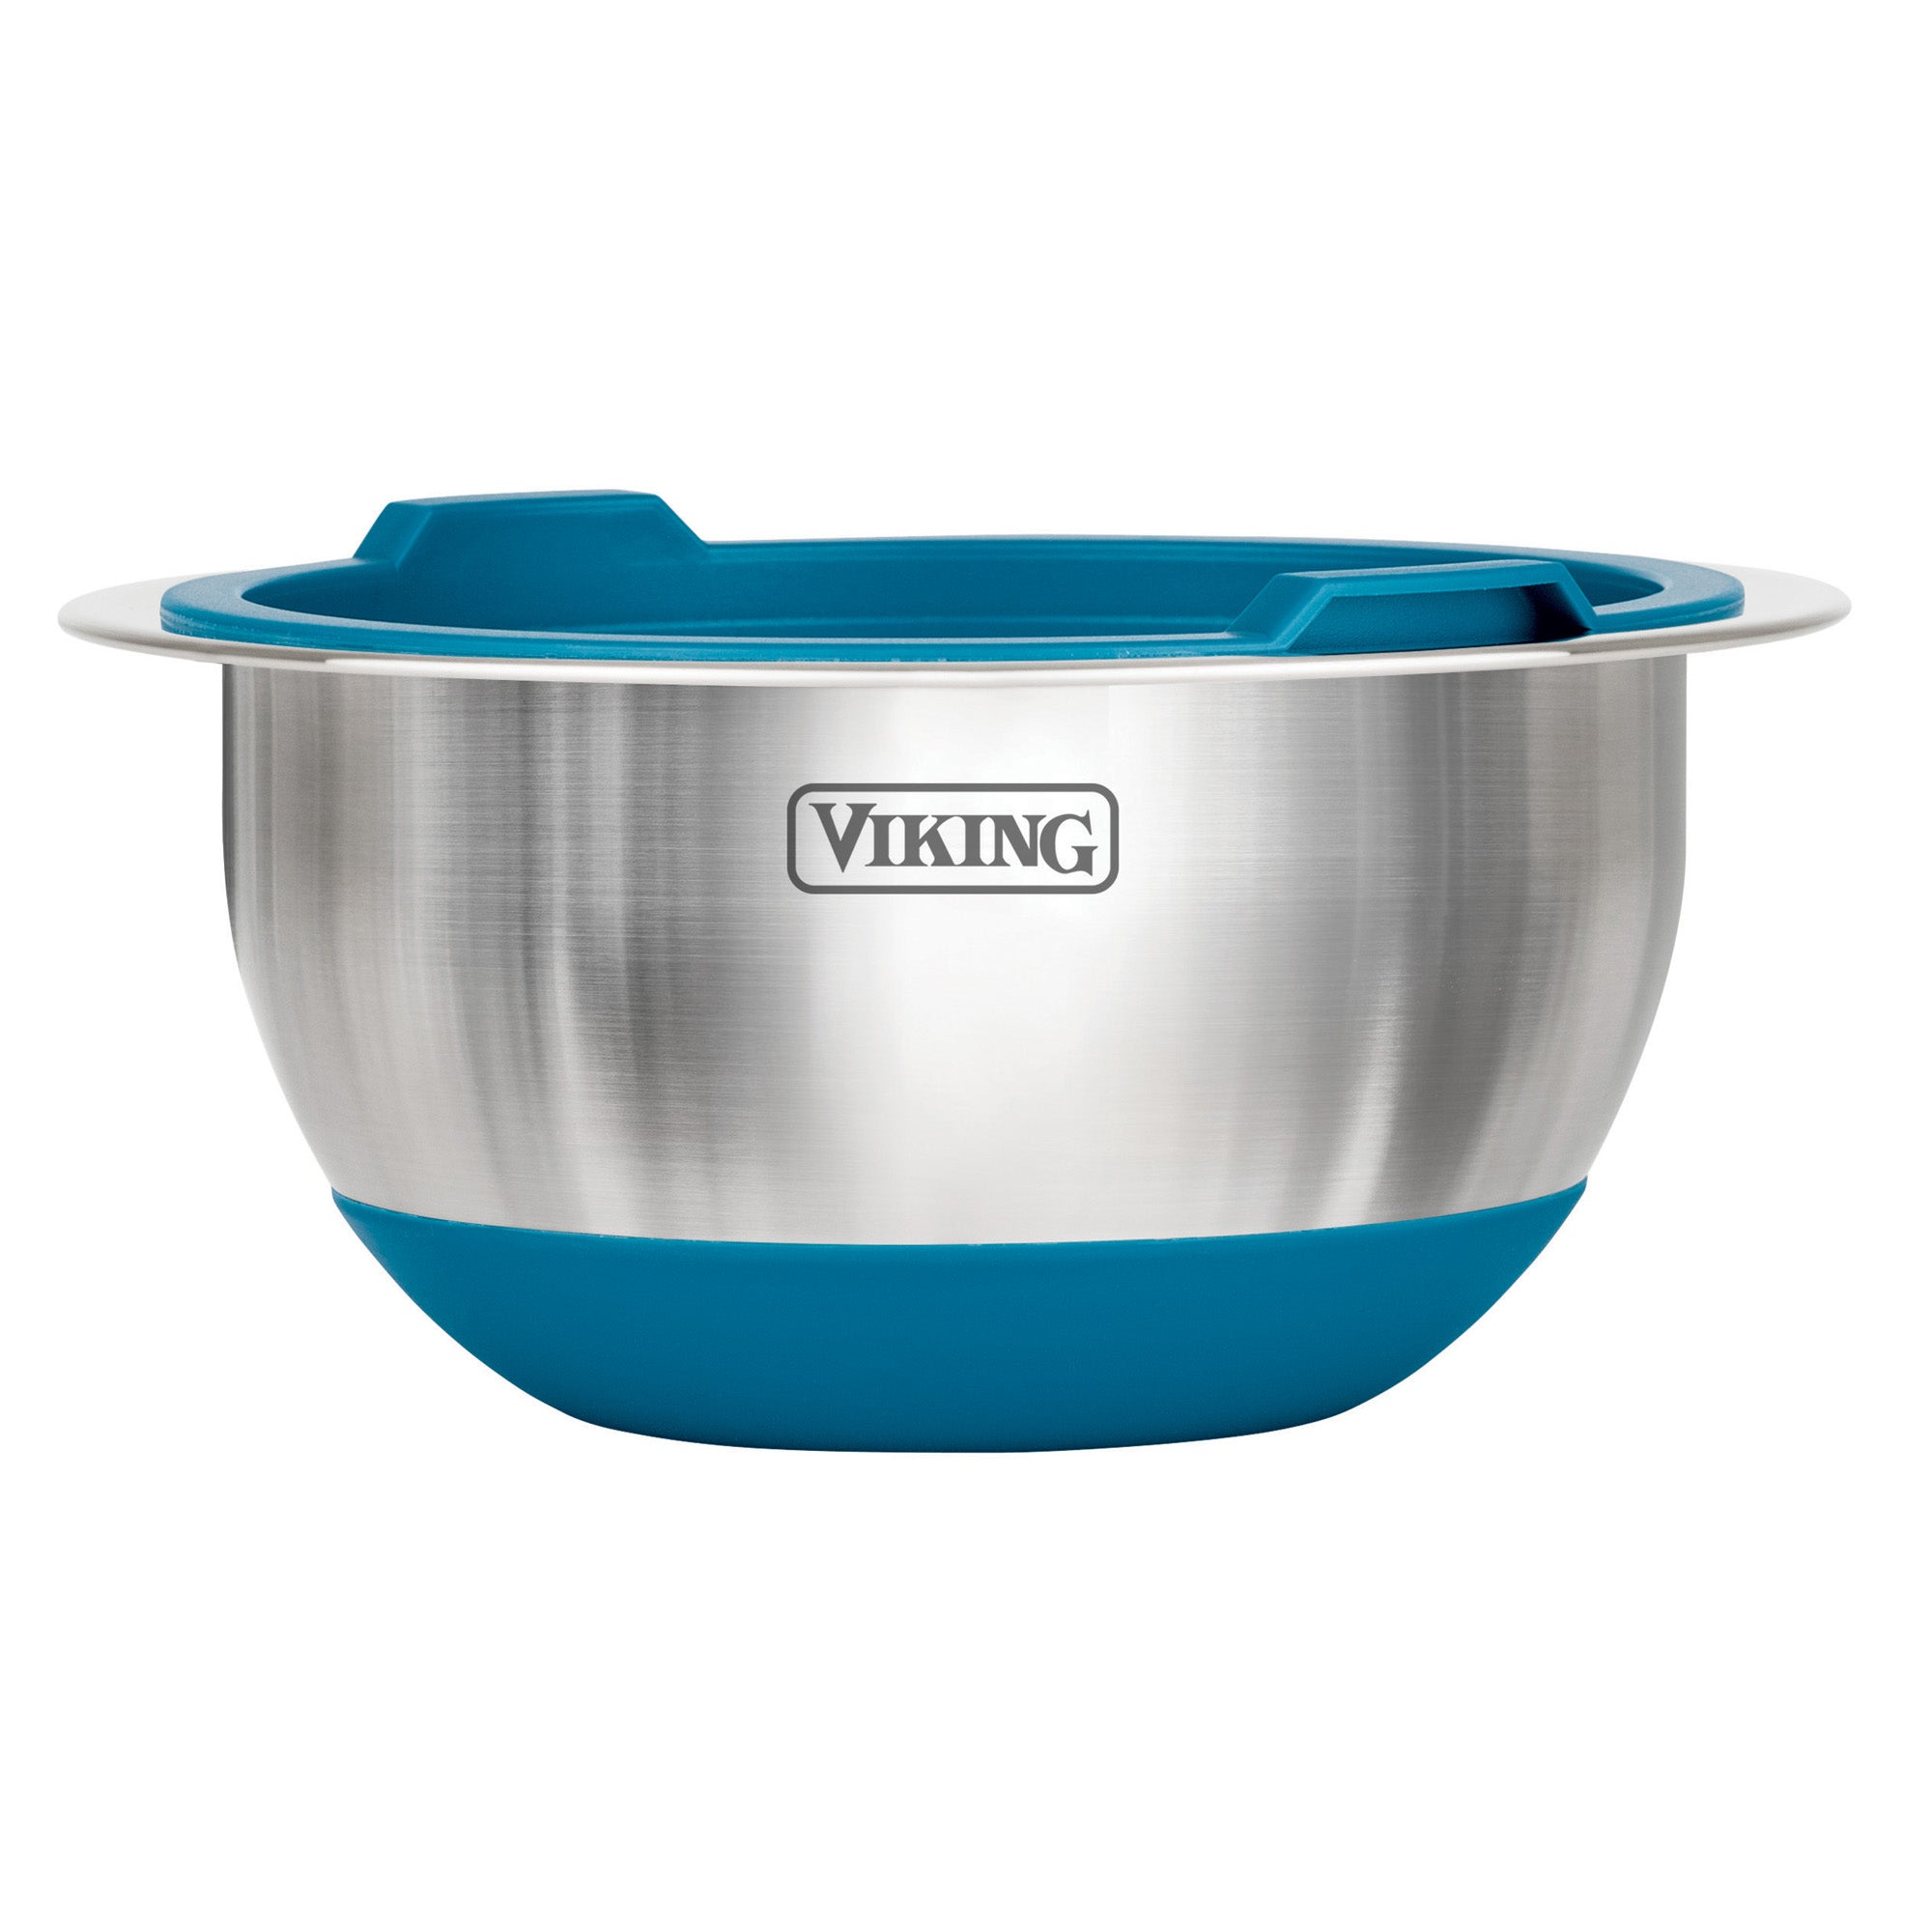 Viking 8-Piece Stainless Steel Mixing Bowl Set with Lids, Teal